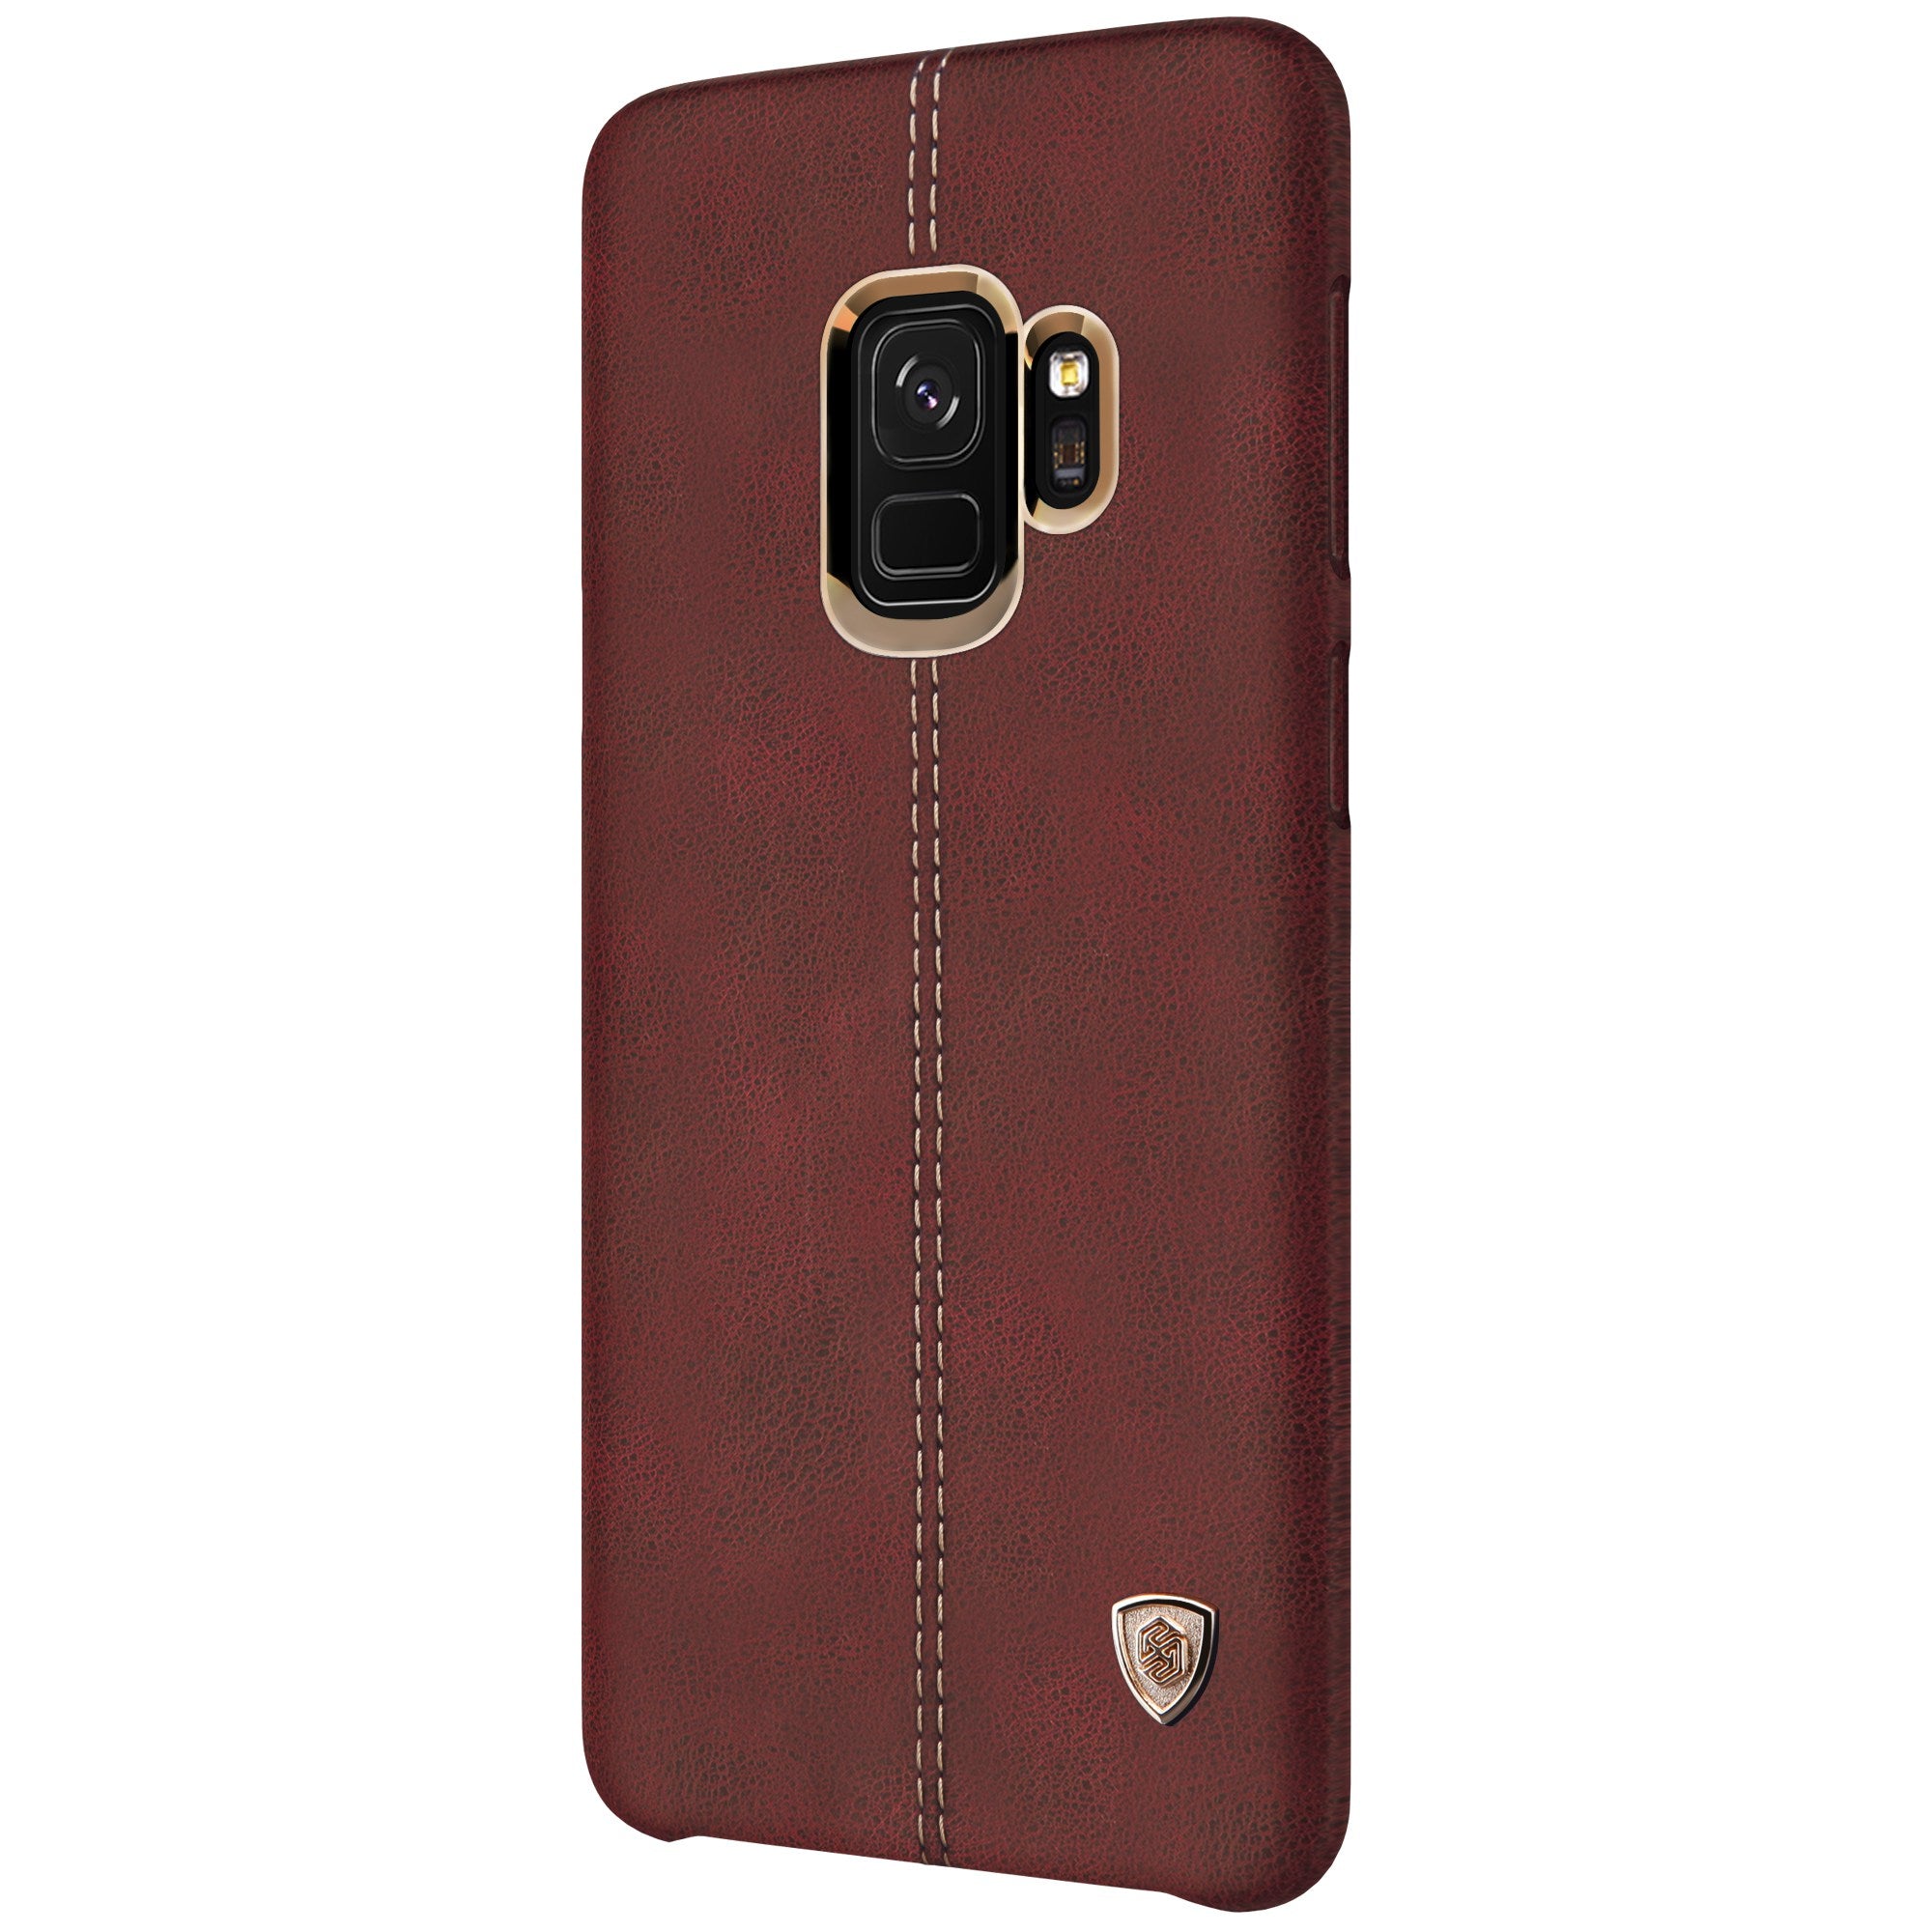 NILLKIN Englon Crazy Horse Grain Leather Protective Case for Samsung Galaxy S9